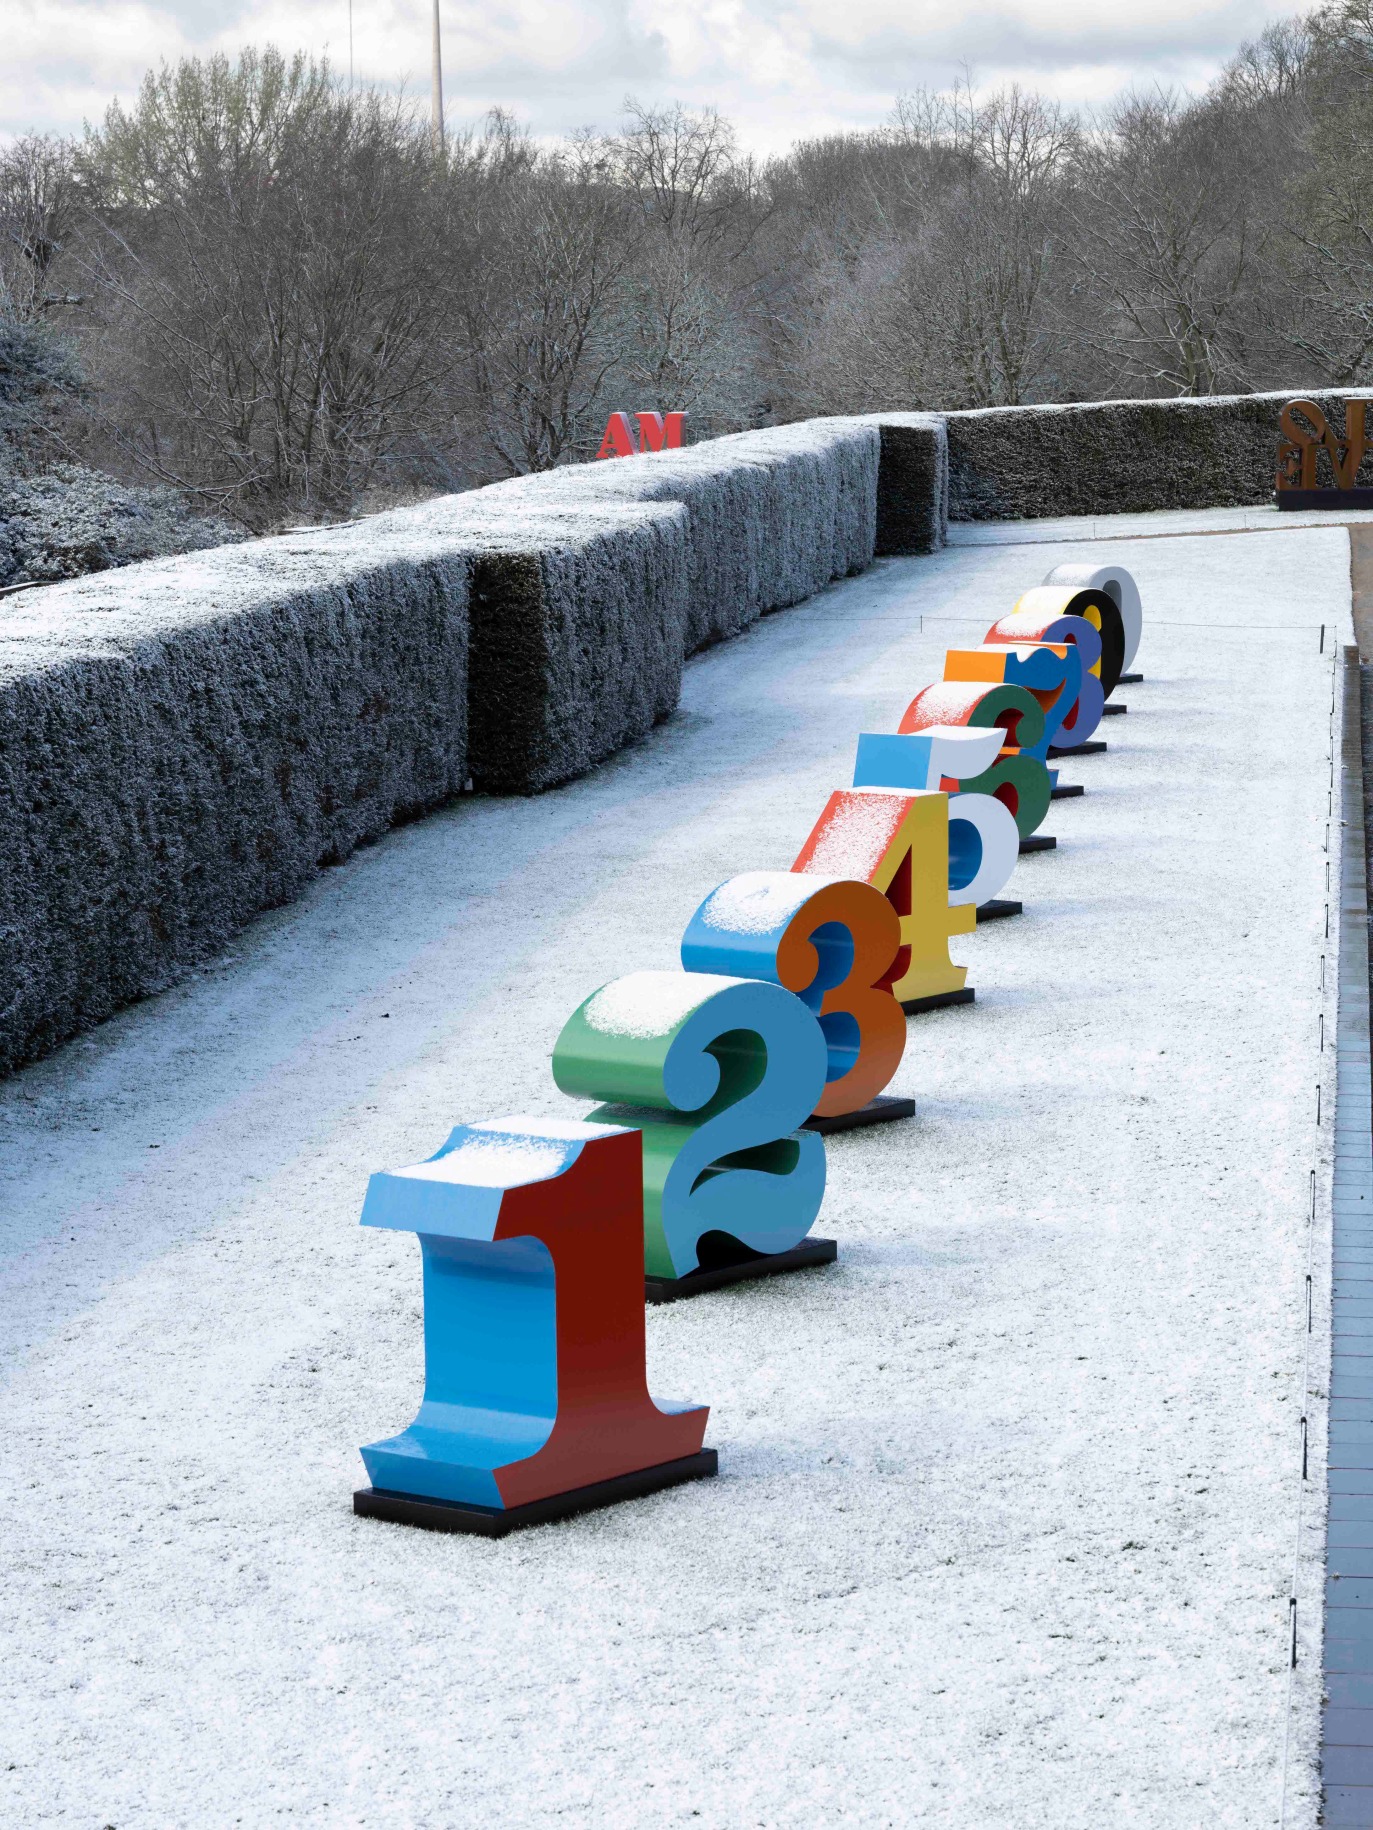 Installation view of Indiana&#039;s 6-foot ONE Through ZERO (The Ten Numbers)&nbsp;(1980&ndash;2001) in&nbsp;Robert Indiana: Sculpture 1958-2018, Yorkshire Sculpture Park, March 12, 2022&ndash;January 8, 2023. Photo: &copy; Jonty Wilde, courtesy of Yorkshire Sculpture Park. Artwork: &copy; 2022 Morgan Art Foundation Ltd./ Artists Rights Society (ARS), New York/DACS, London